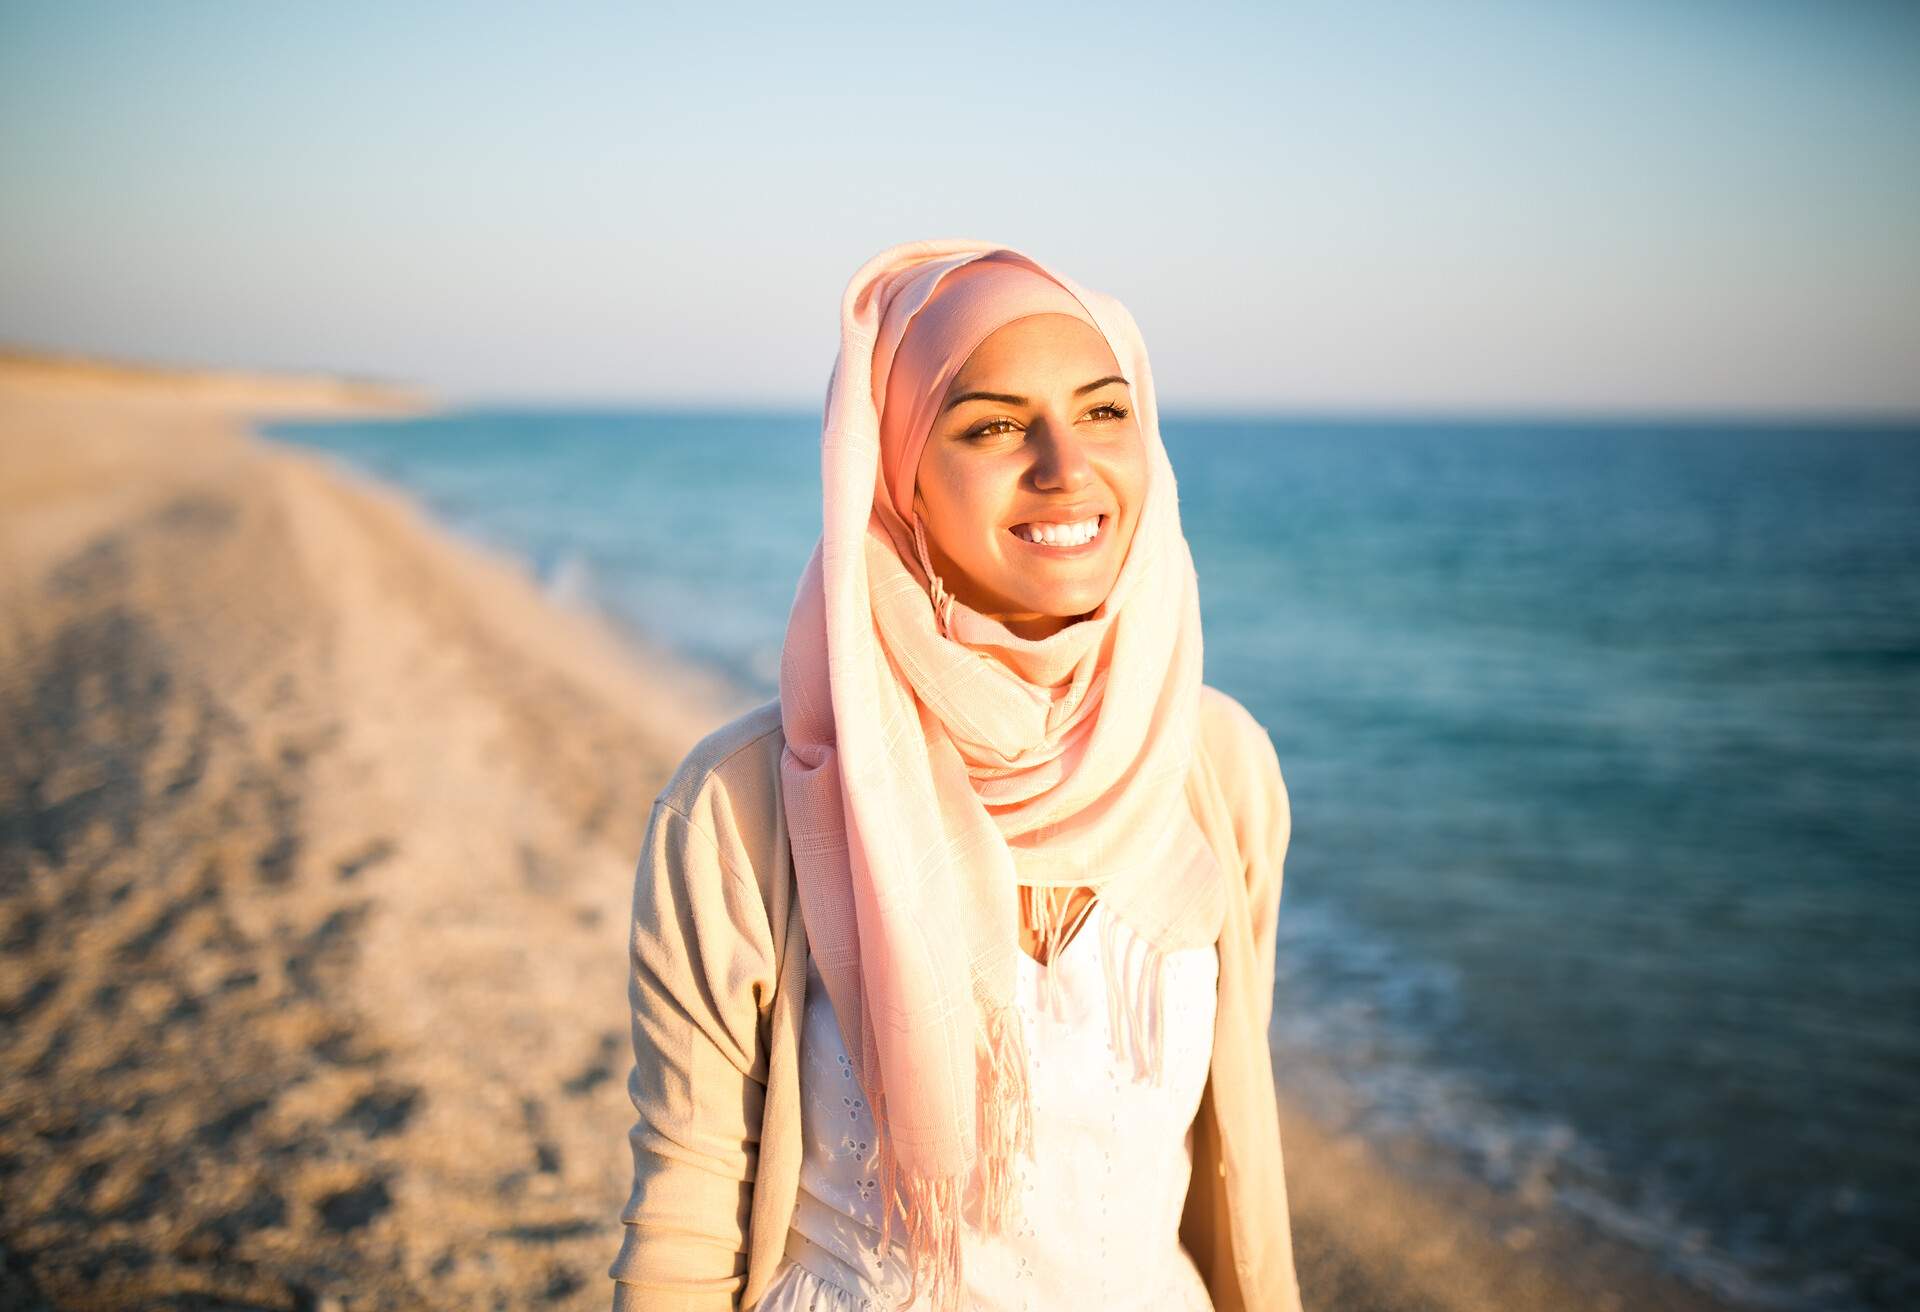 Young beautiful happy muslim woman outdoors portrait.Seaside,beach walk.Beautiful arab saudi woman face posing on the beach with the sea in the background